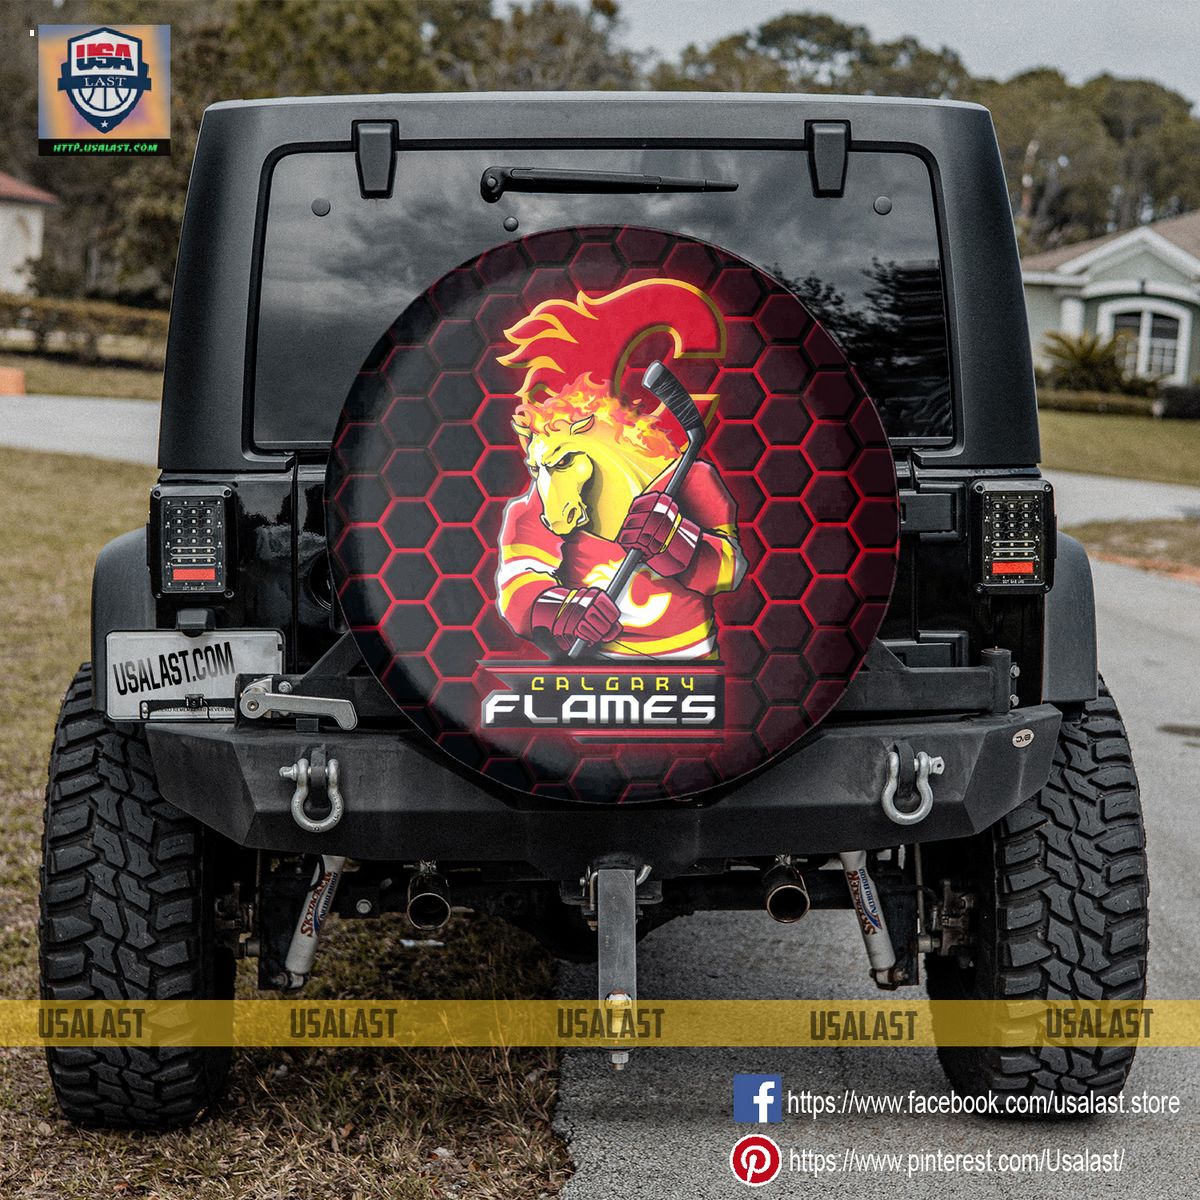 AMAZING Calgary Flames NHL Mascot Spare Tire Cover